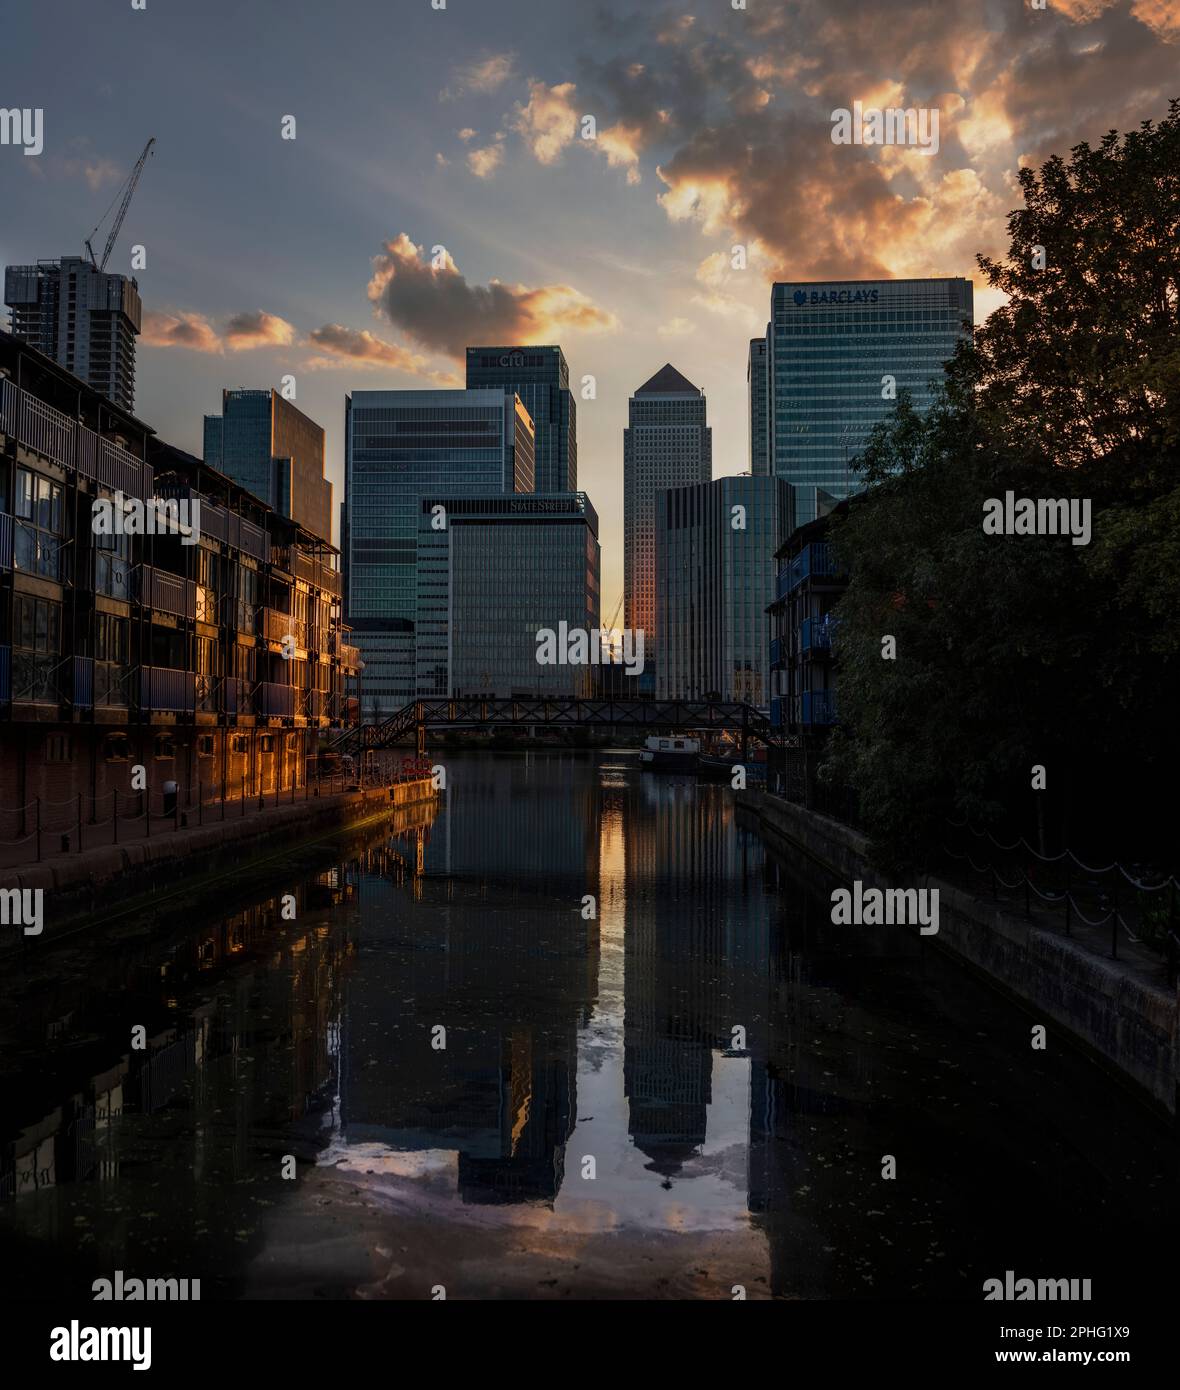 Canary Wharf at dusk, looking across Blackwall Basin from near the River Themes, the towers reflected in the water. Stock Photo